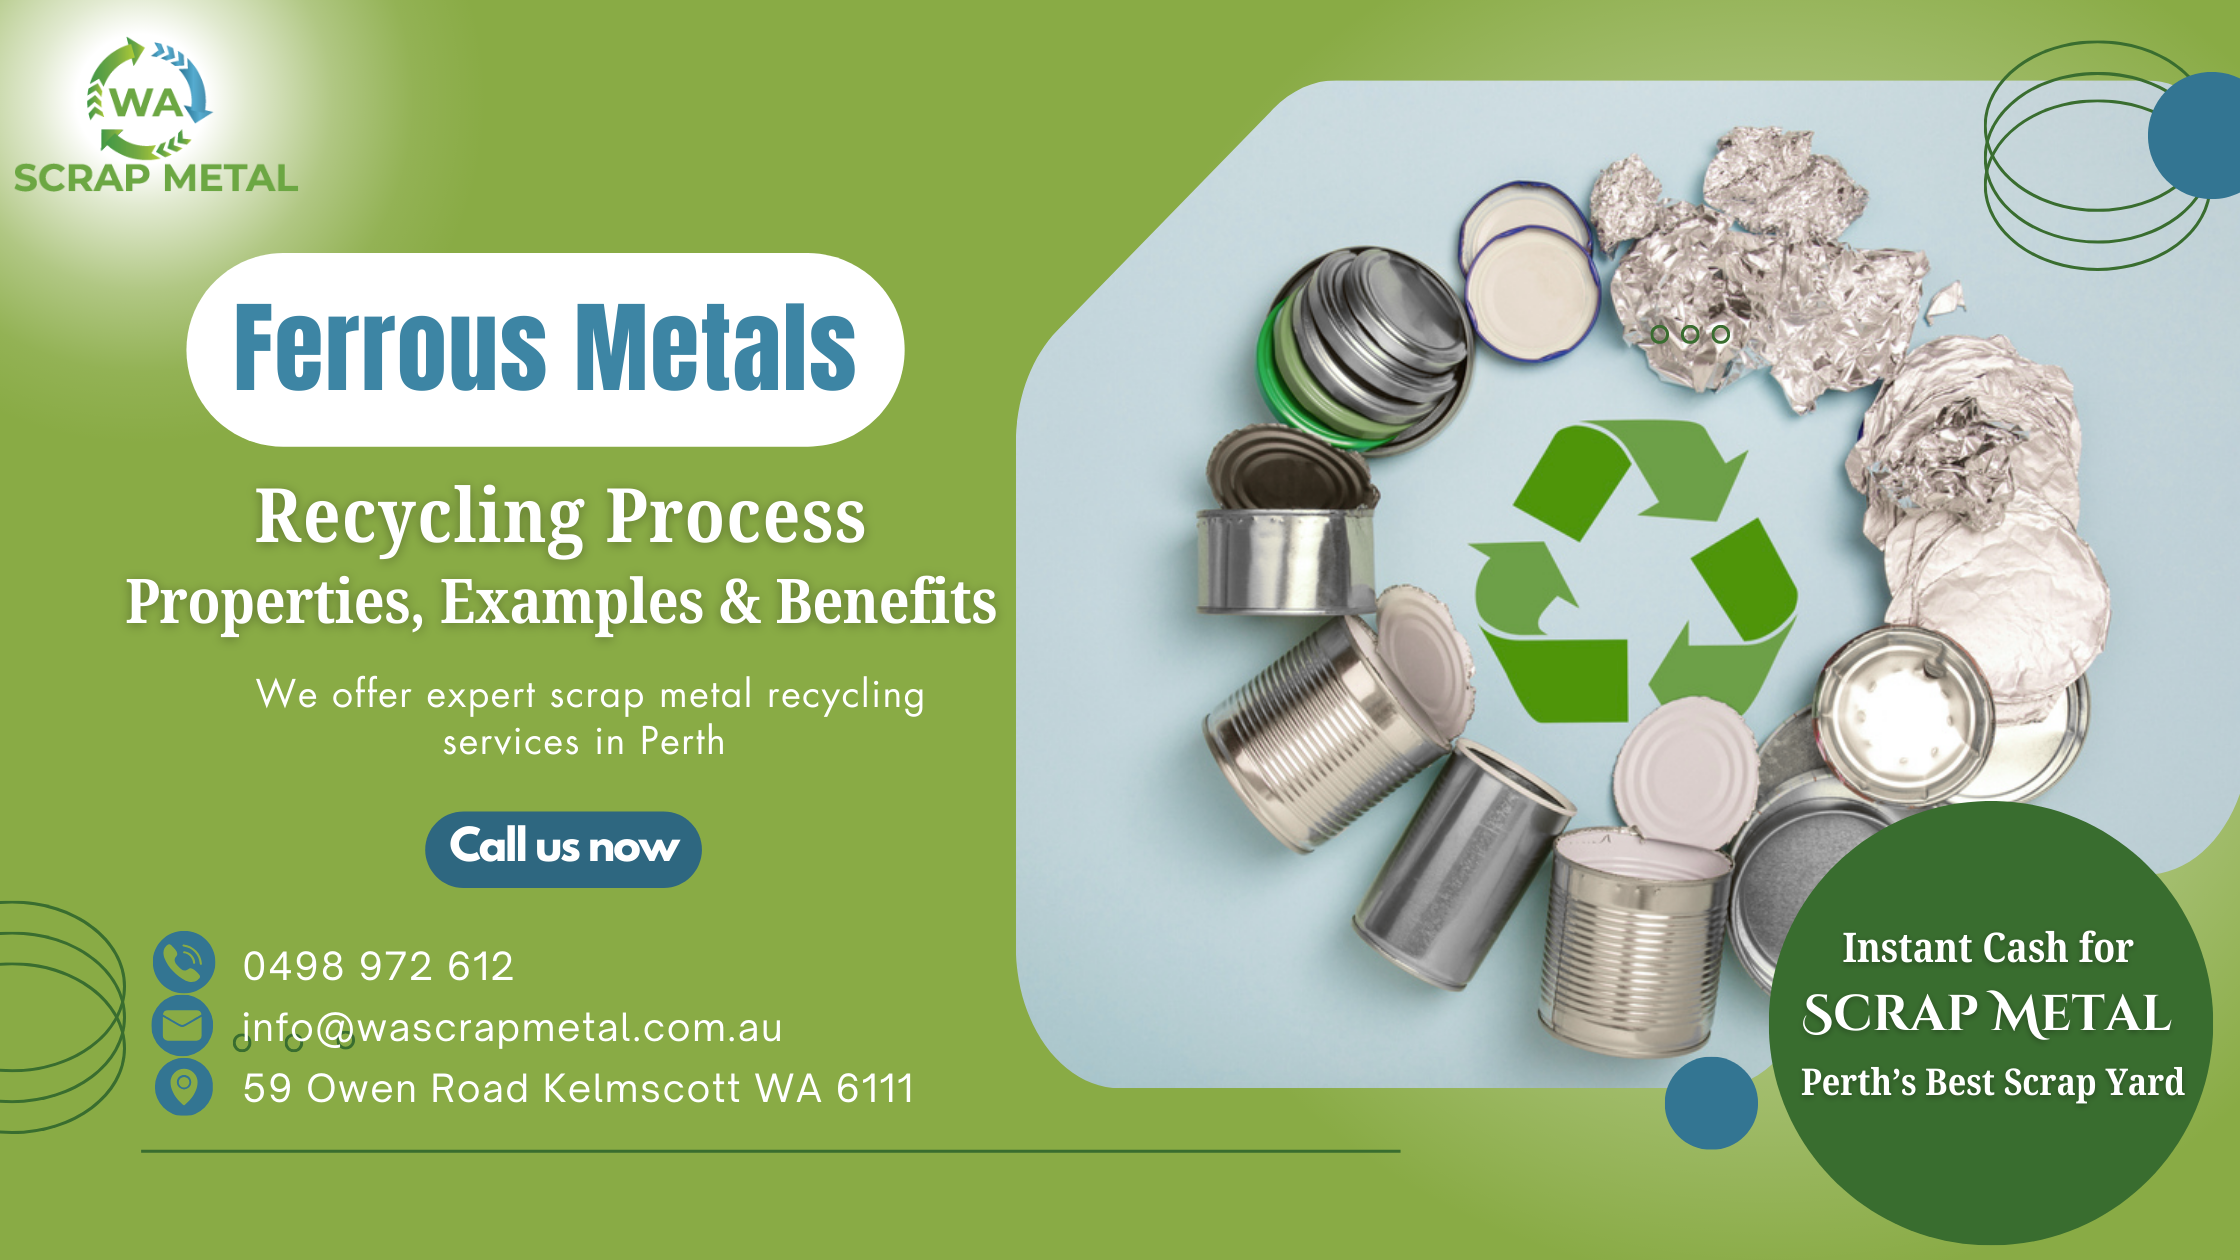 What Are Ferrous Metals & How Can They Be Recycled?